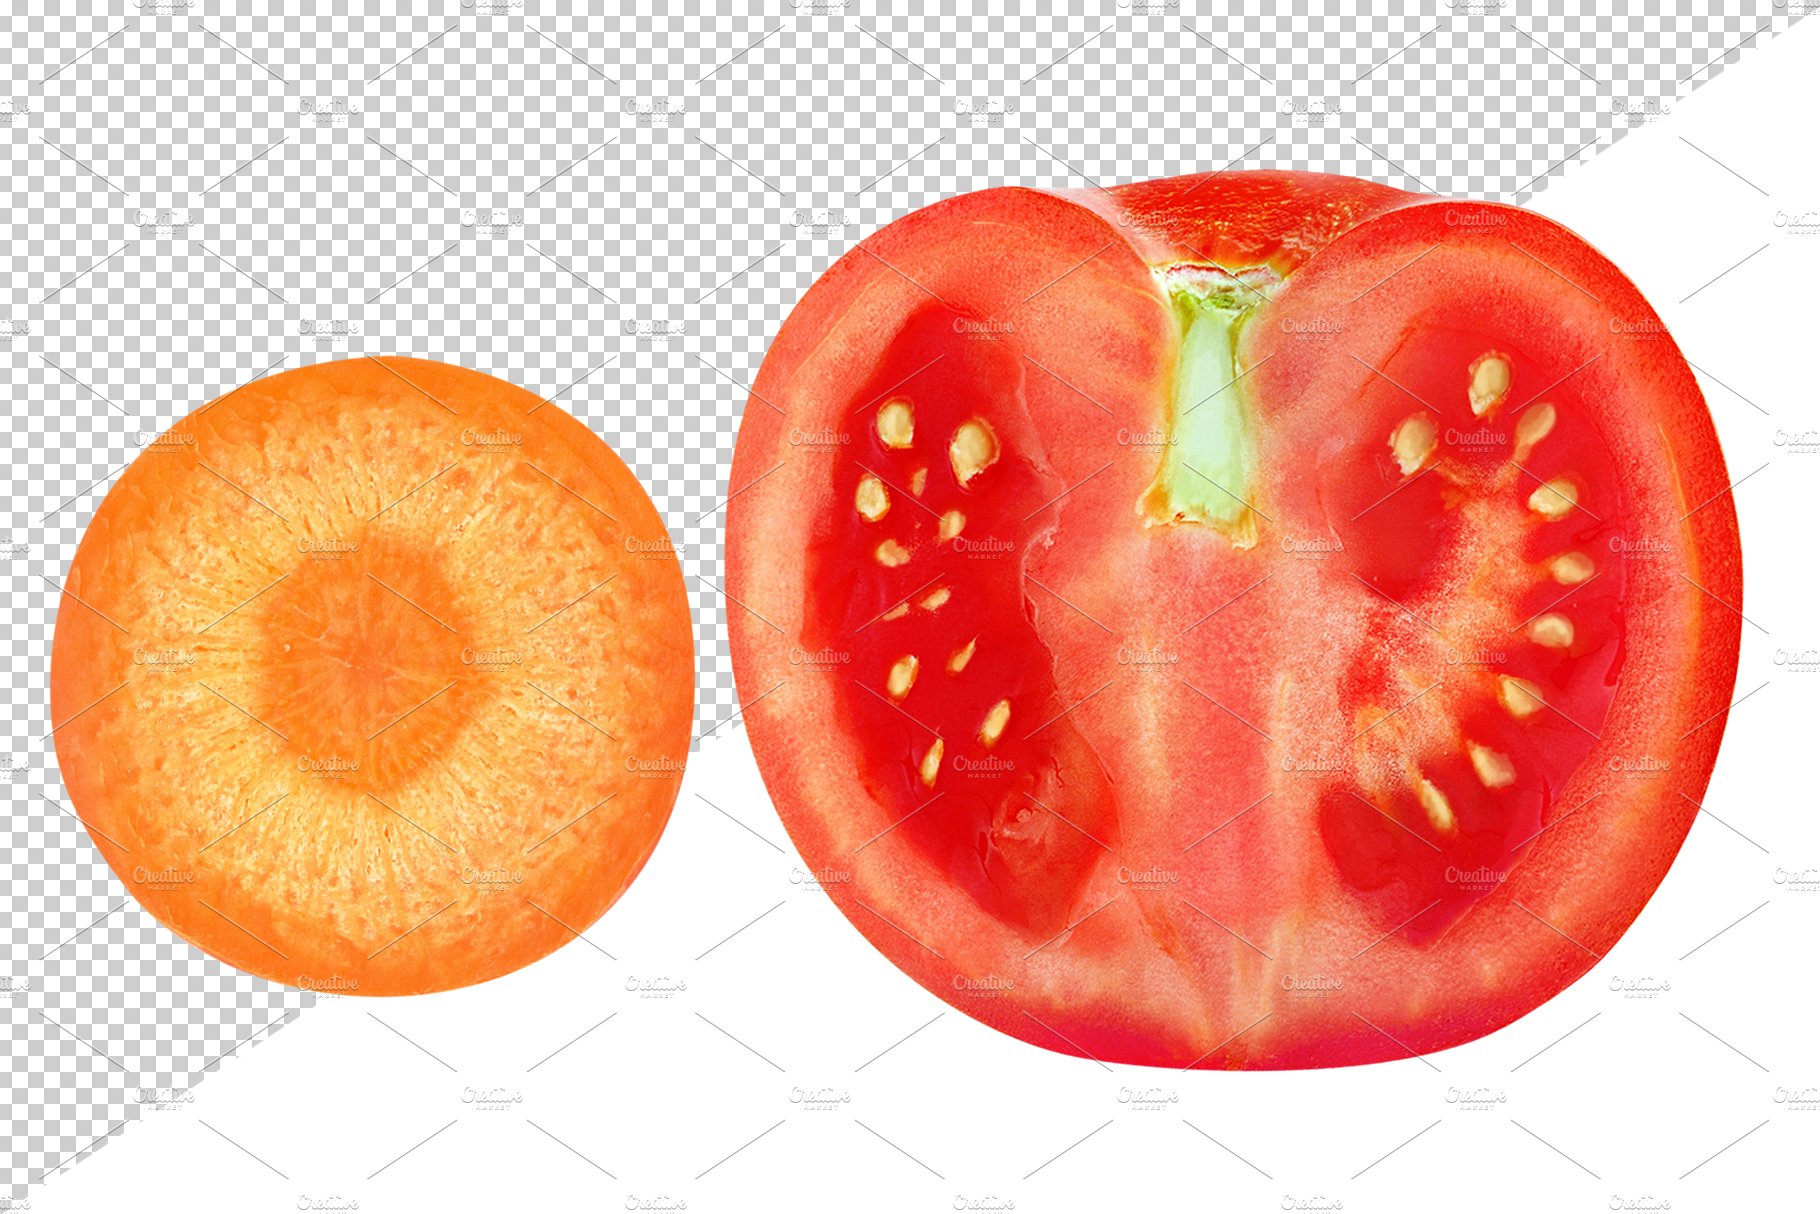 Vegetable slices preview image.